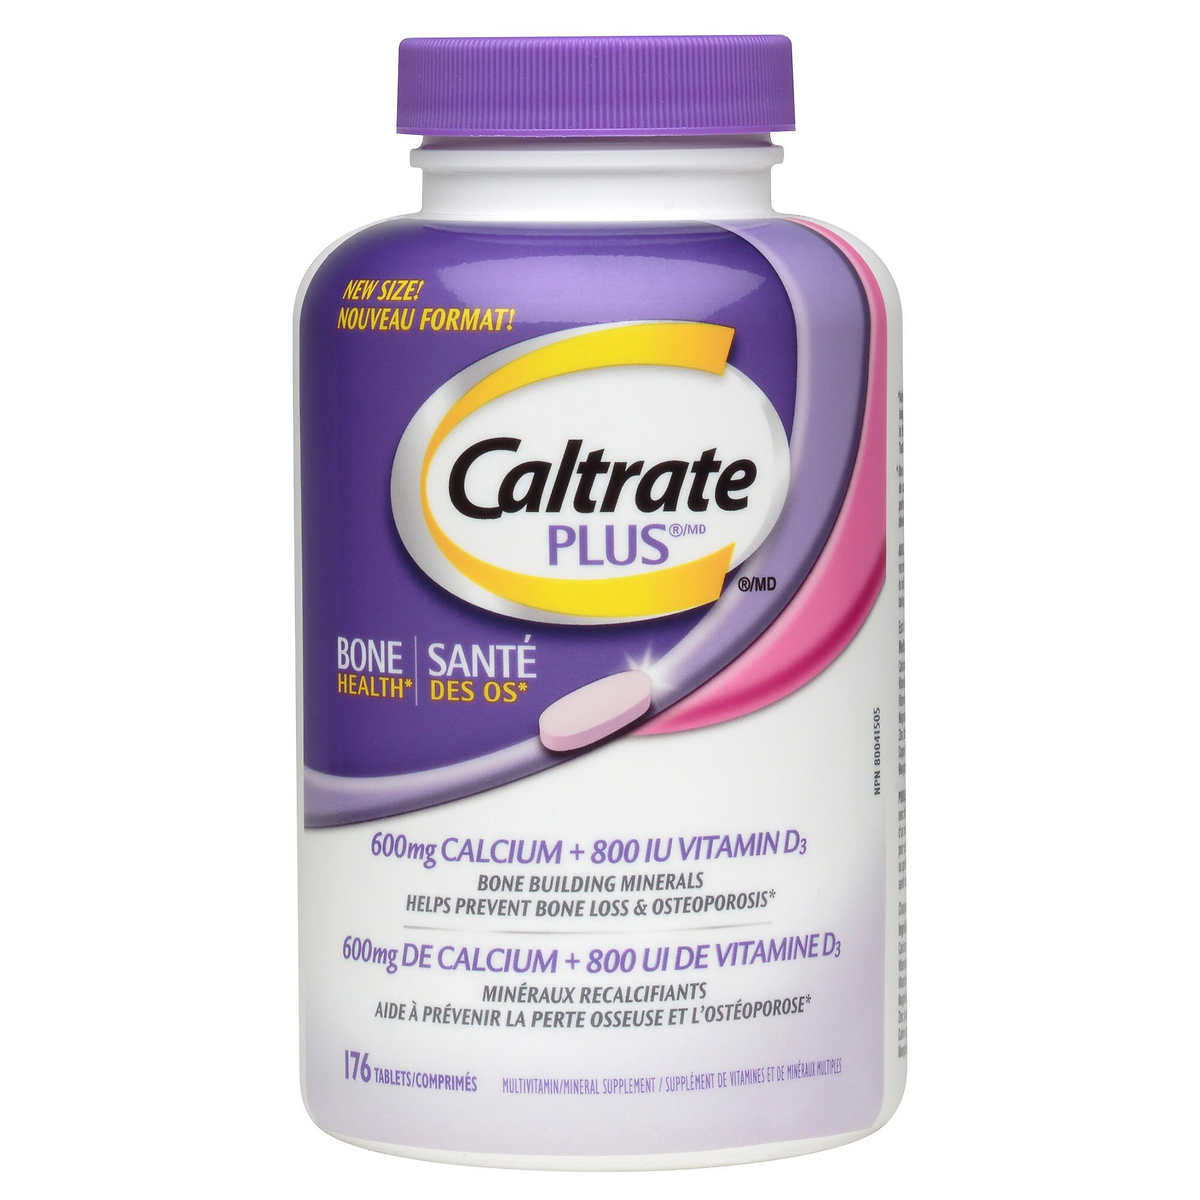 Caltrate PLUS Bone Health Supplement with 800 IU Vitamin D3 Tablets, 176-count